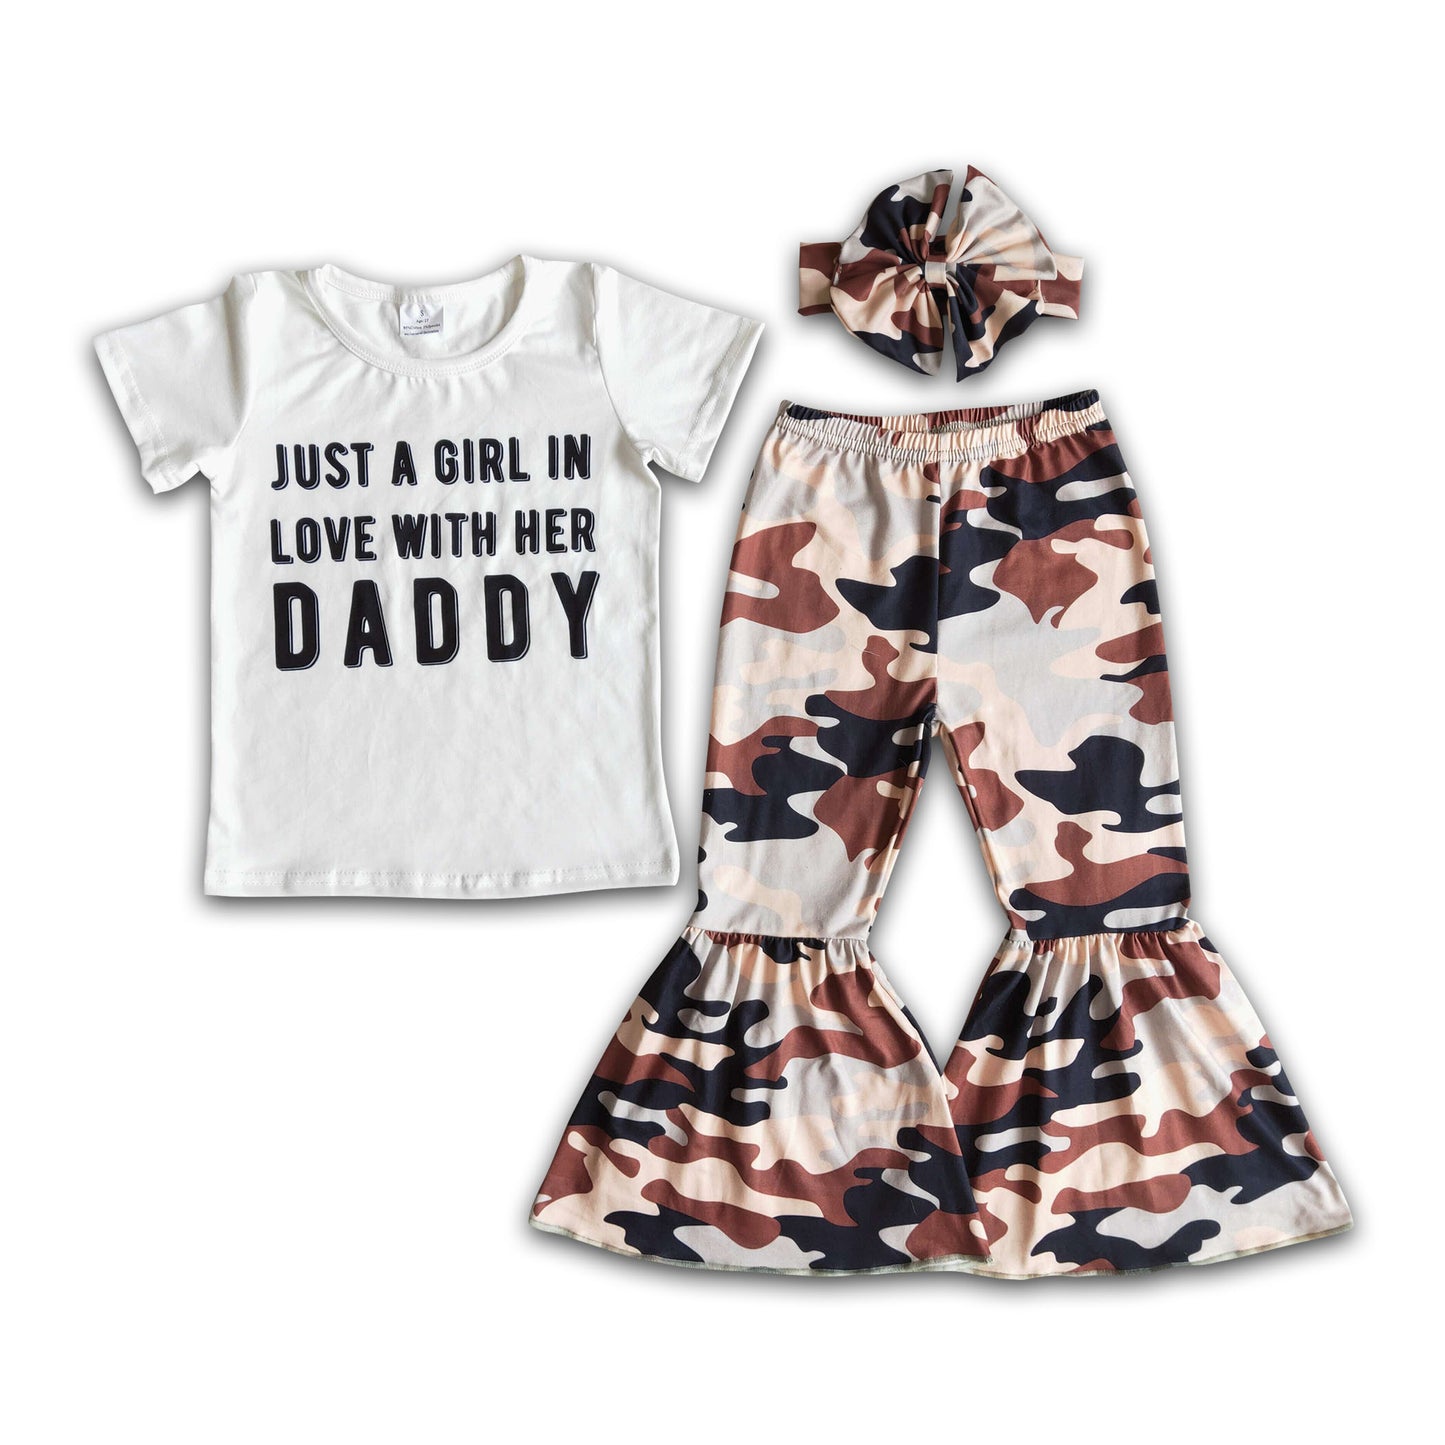 Just a girl in love with her daddy camo bell bottom pants girls boutique clothes